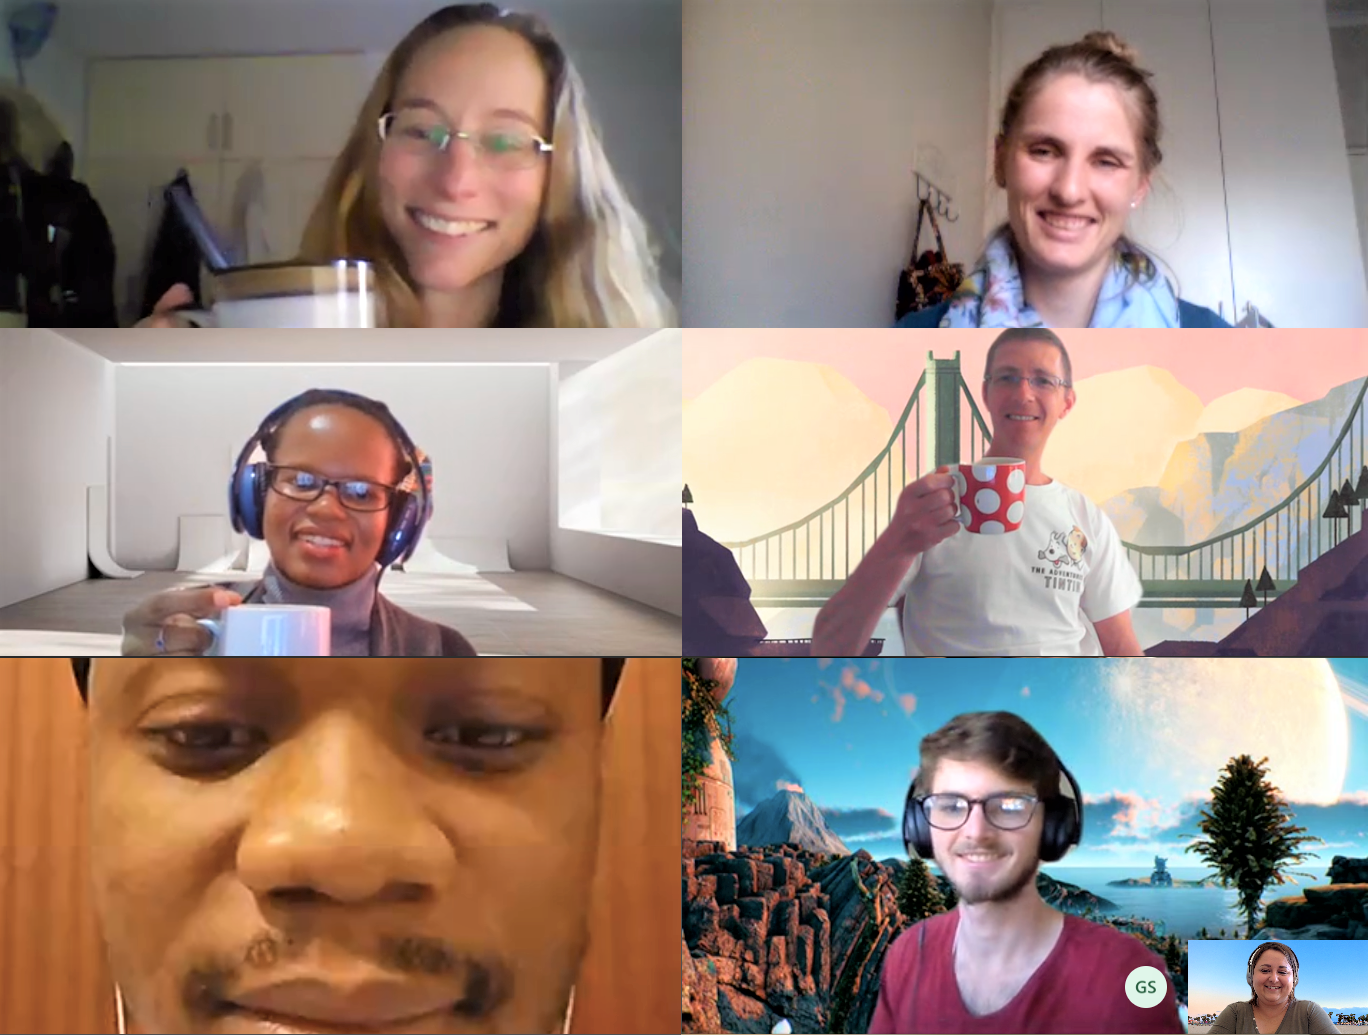 Some of the EucXylo Team enjoying a 'virtual coffee session' together